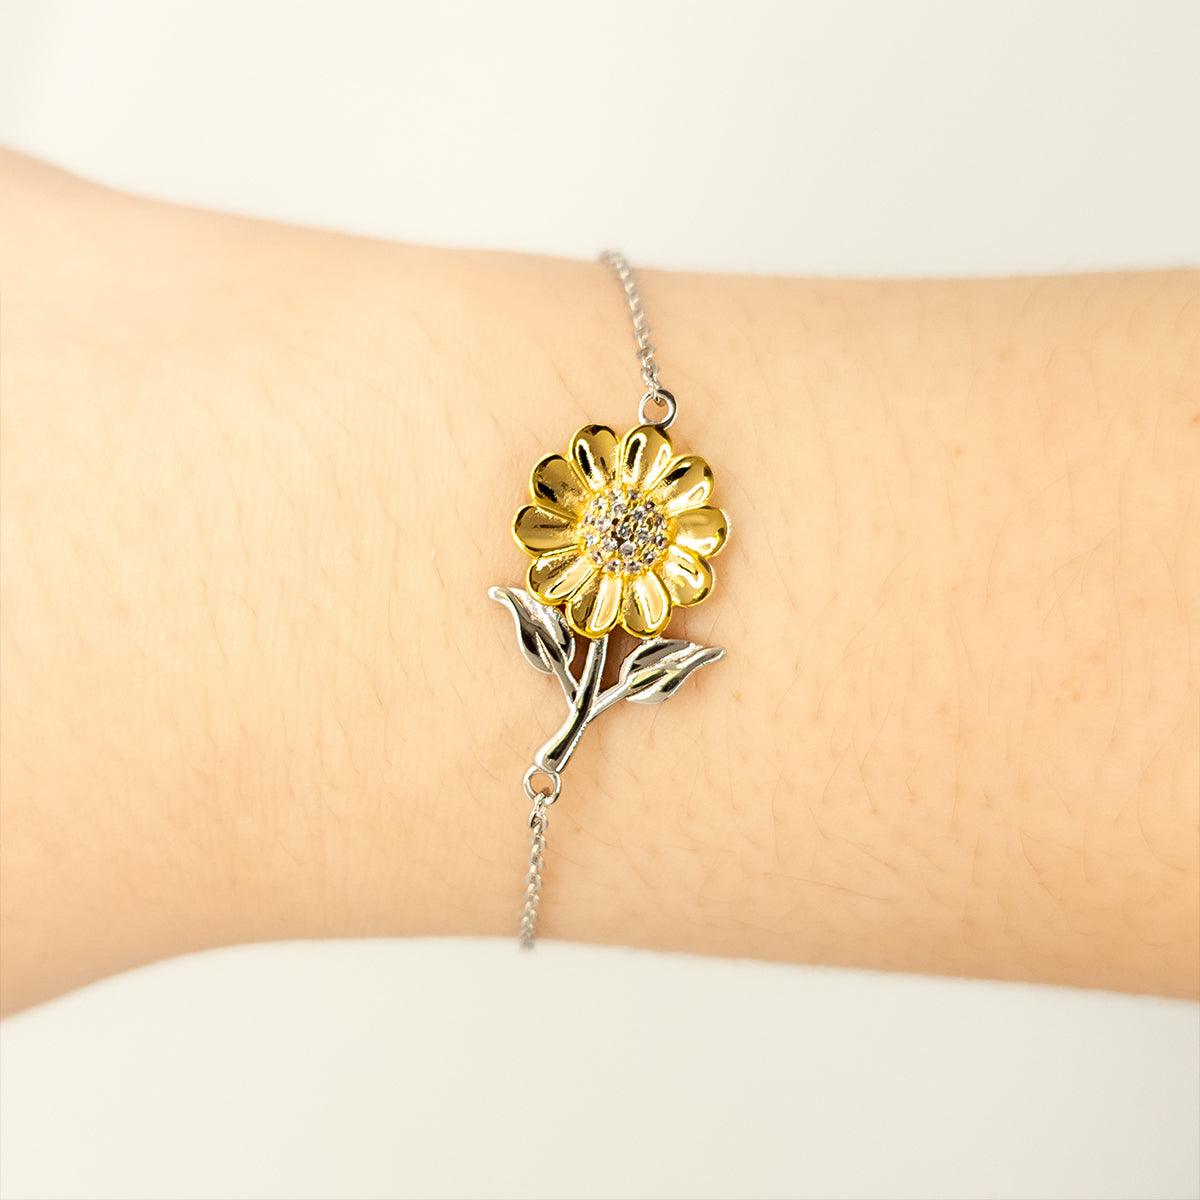 Remarkable Apartment Manager Gifts, Your dedication and hard work, Inspirational Birthday Christmas Unique Sunflower Bracelet For Apartment Manager, Coworkers, Men, Women, Friends - Mallard Moon Gift Shop